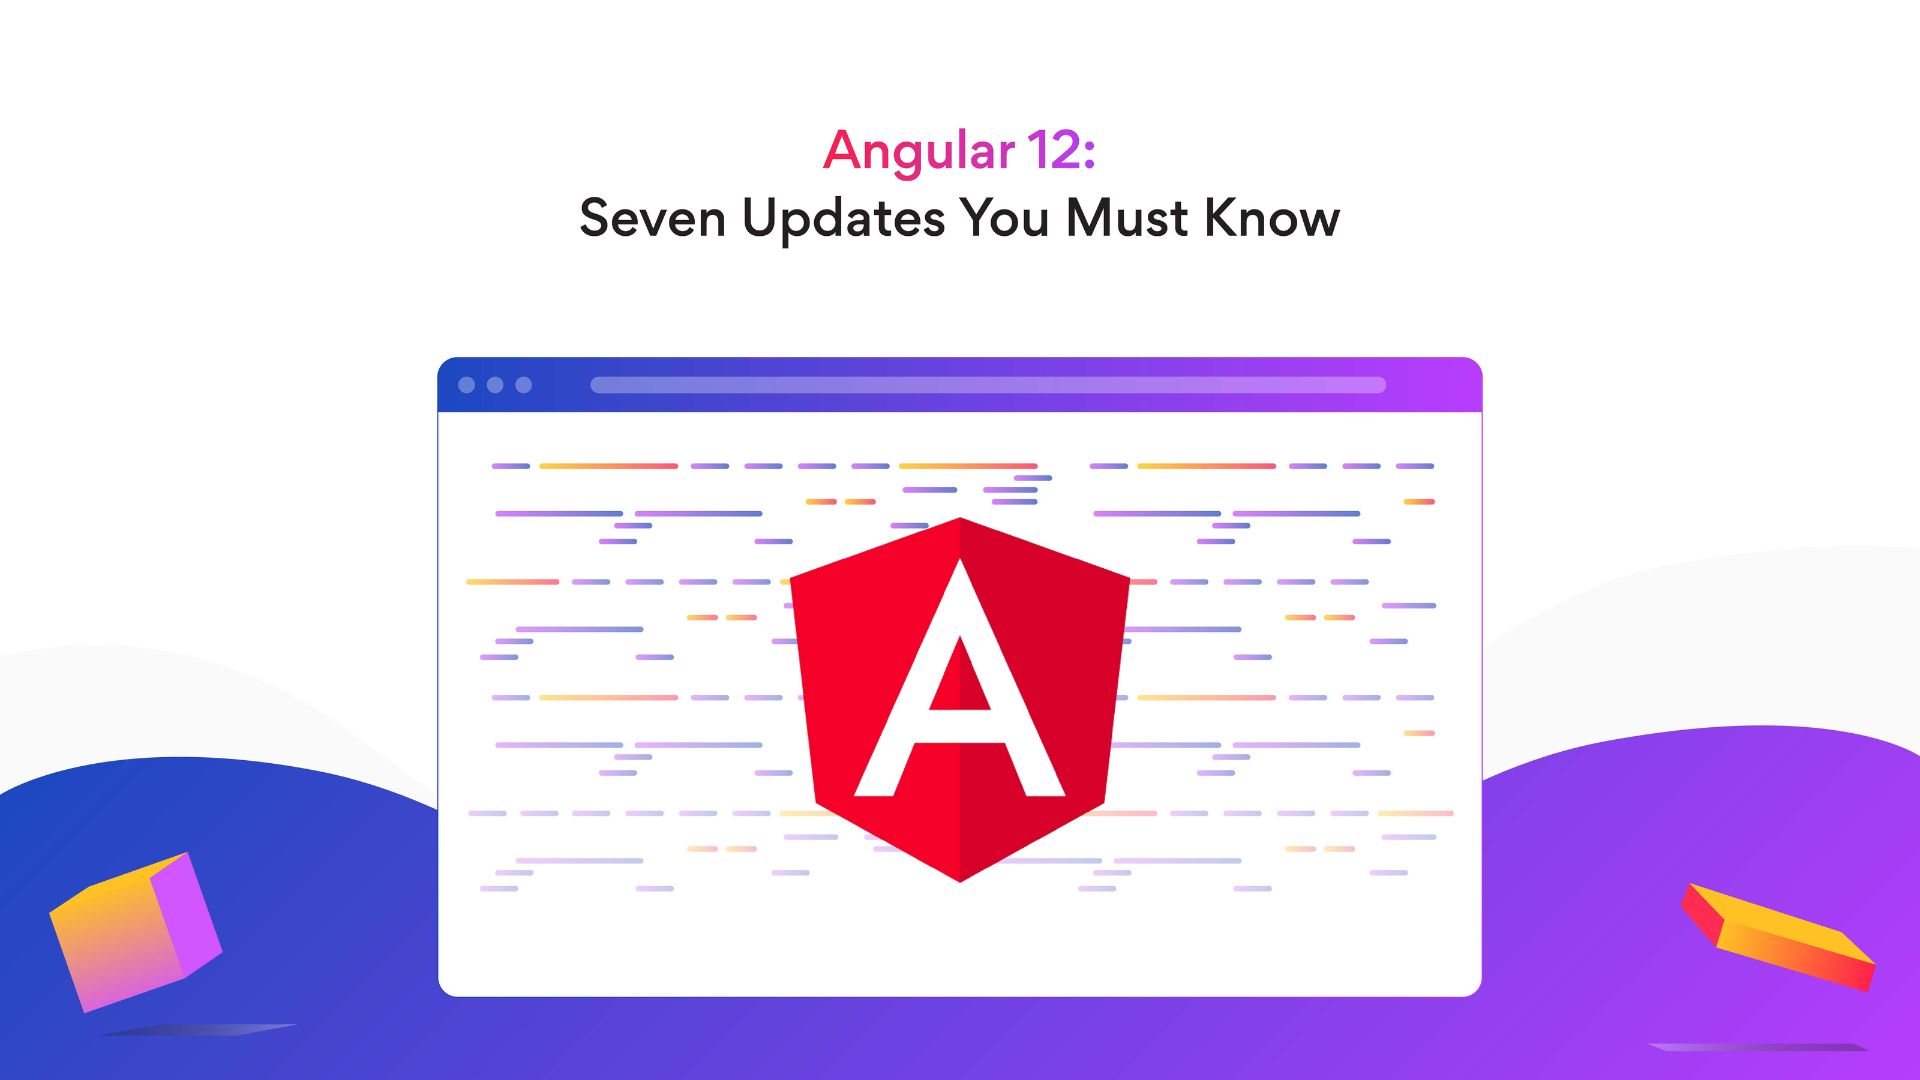 Angular 12 new features